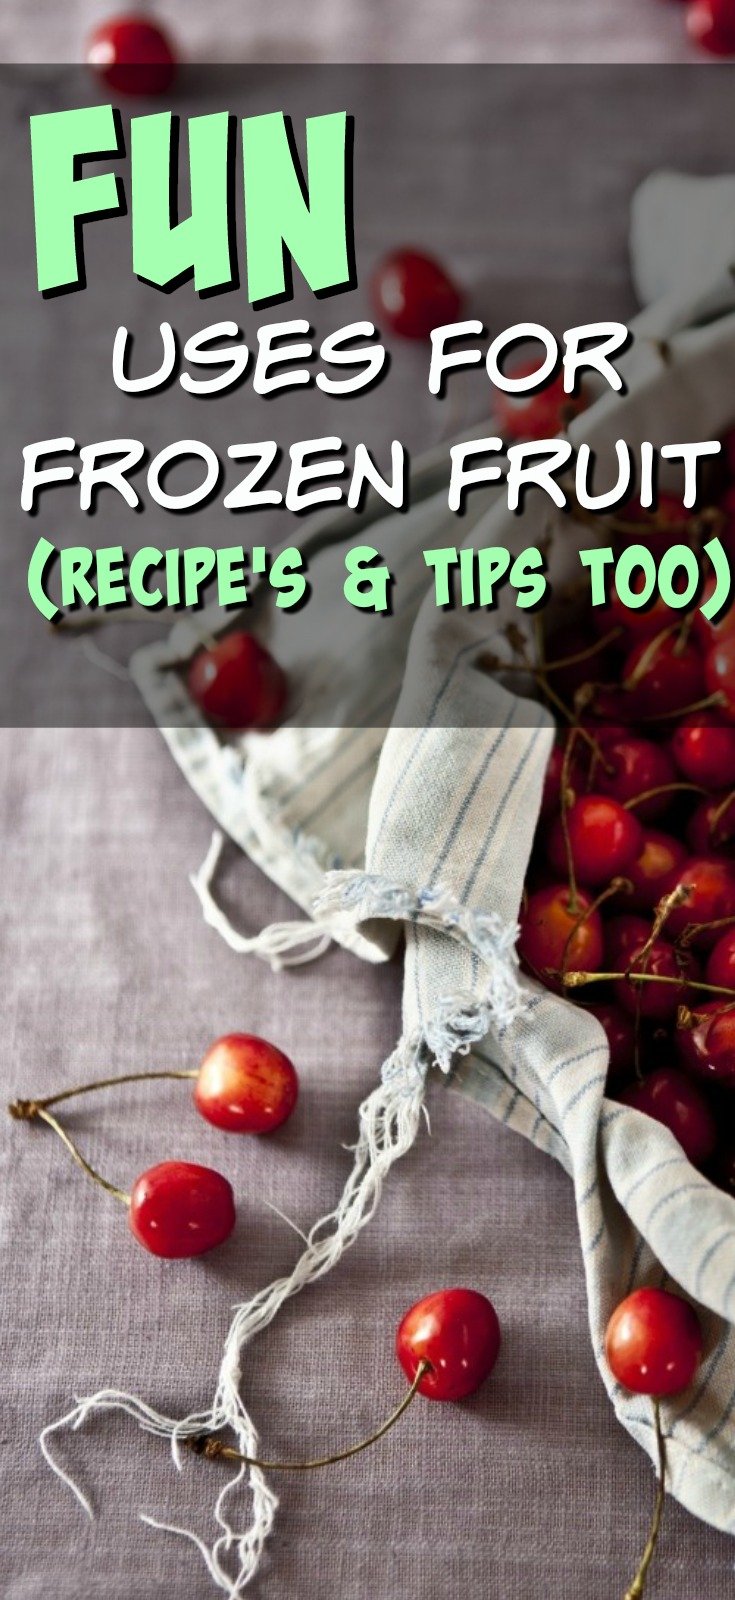 Fun Uses for frozen fruit